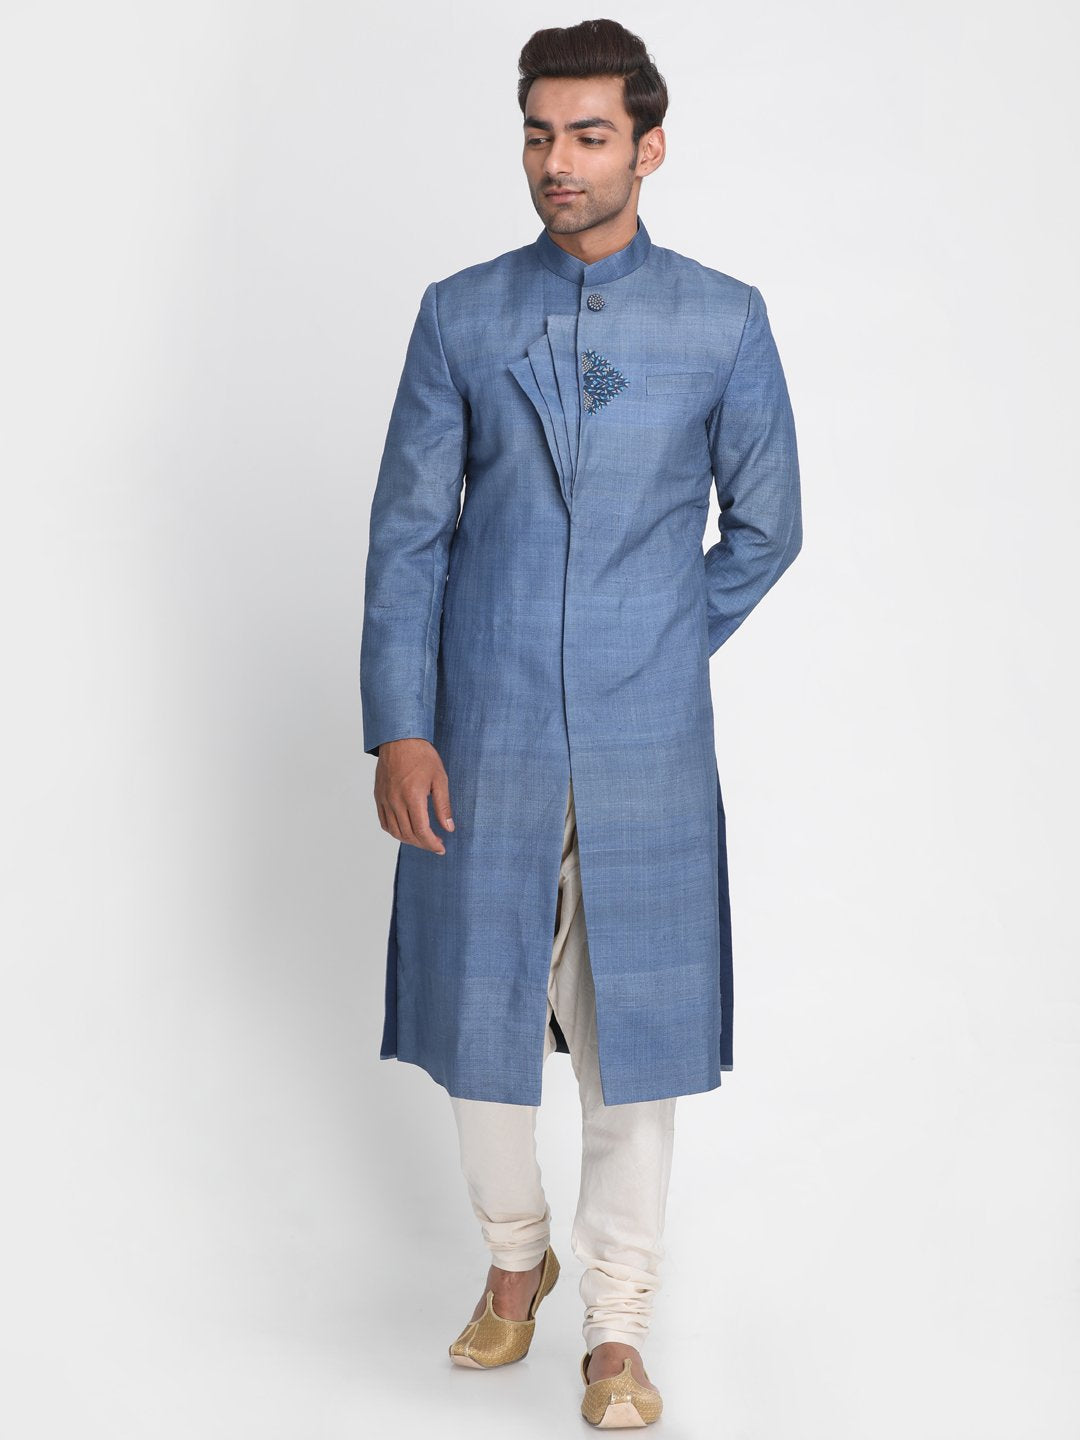 Nakshi Greyish Blue Coloured Intricate Hand Embroided Three Panel Styled Tussar Silk Sherwani Inspired By Gont Art